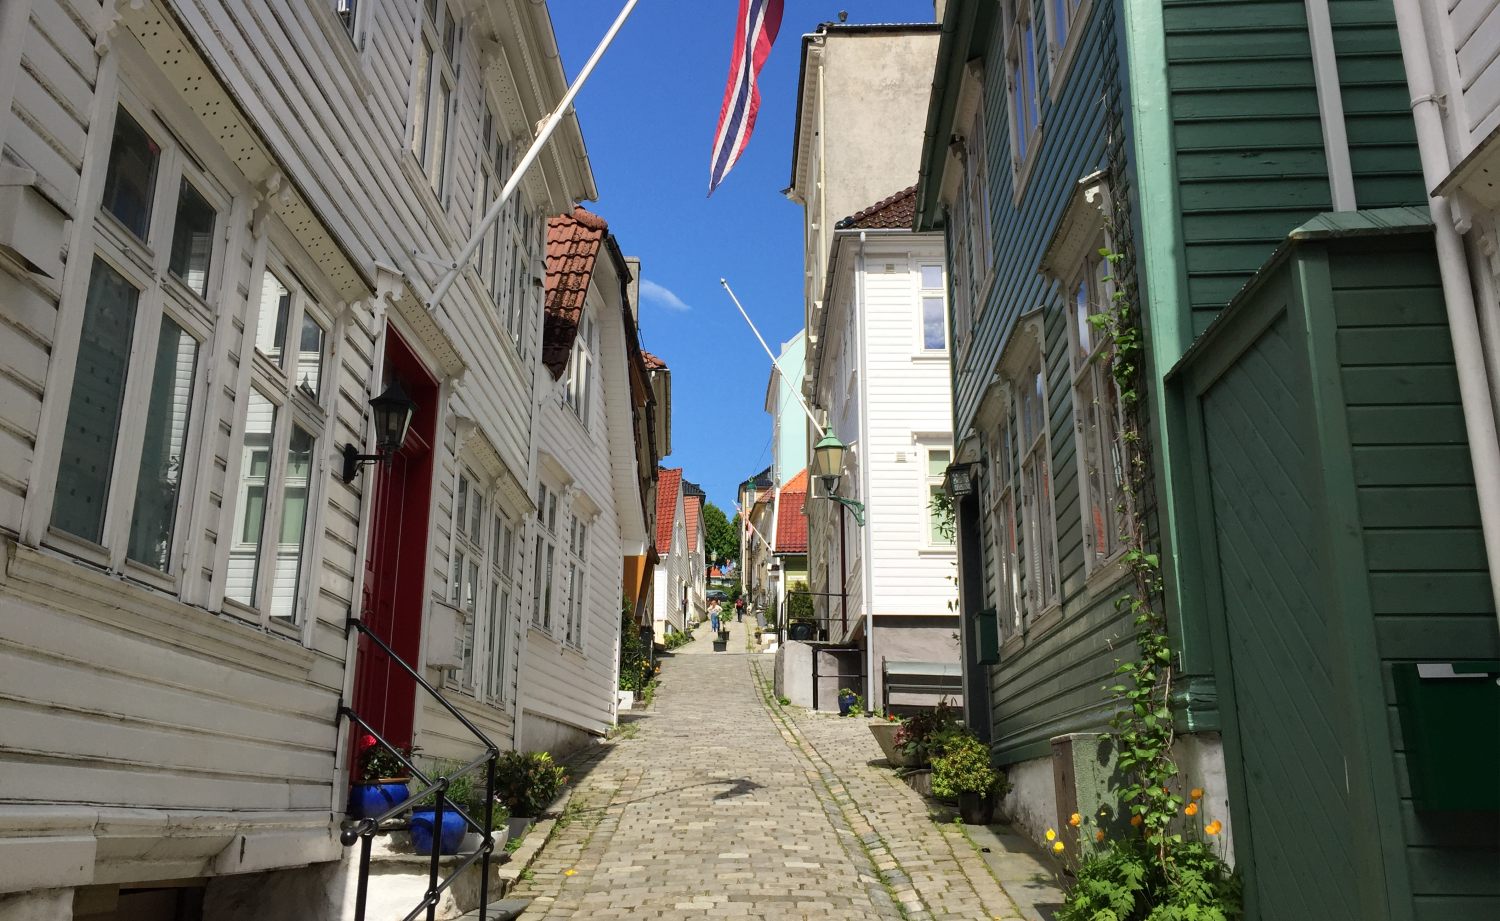 Charming streets in Bergen - ideal for pictures